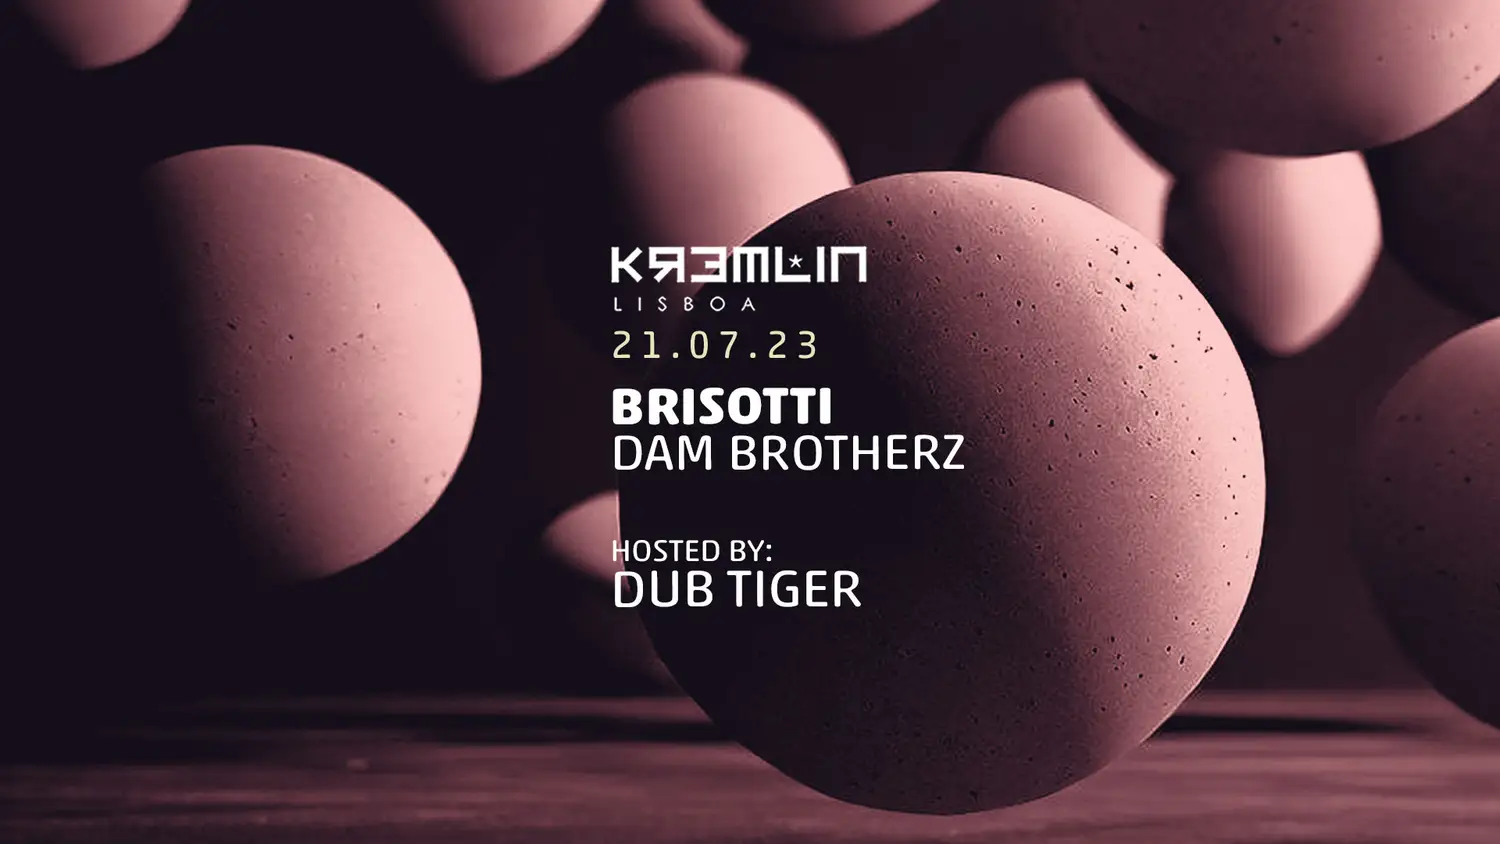 Brisotti Dam Brotherz - hosted by Dub Tiger